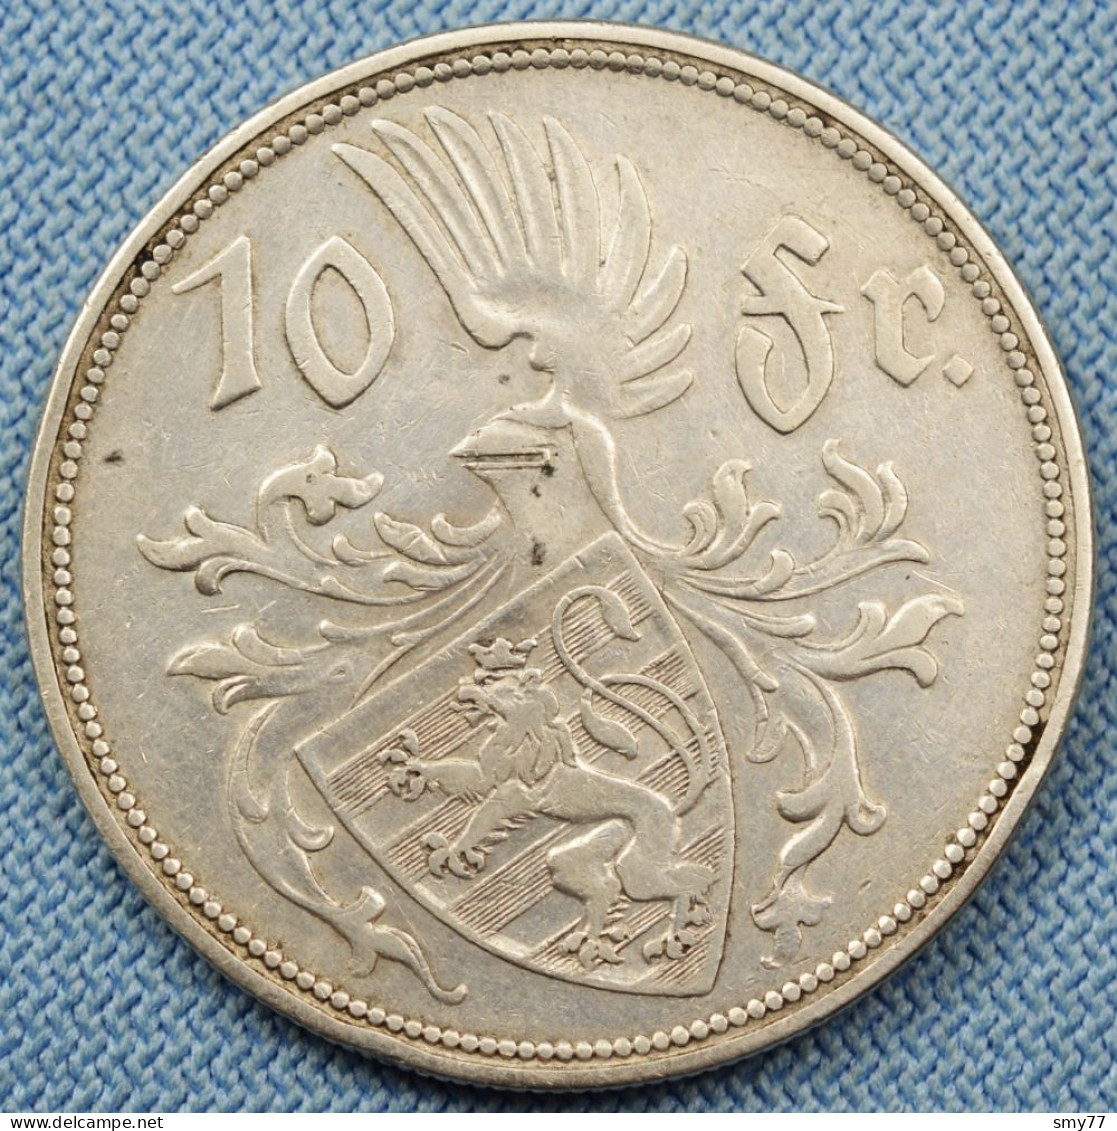 Luxembourg • 10 Francs 1929 • Charlotte •  Luxemburg •  [24-693] - Luxembourg